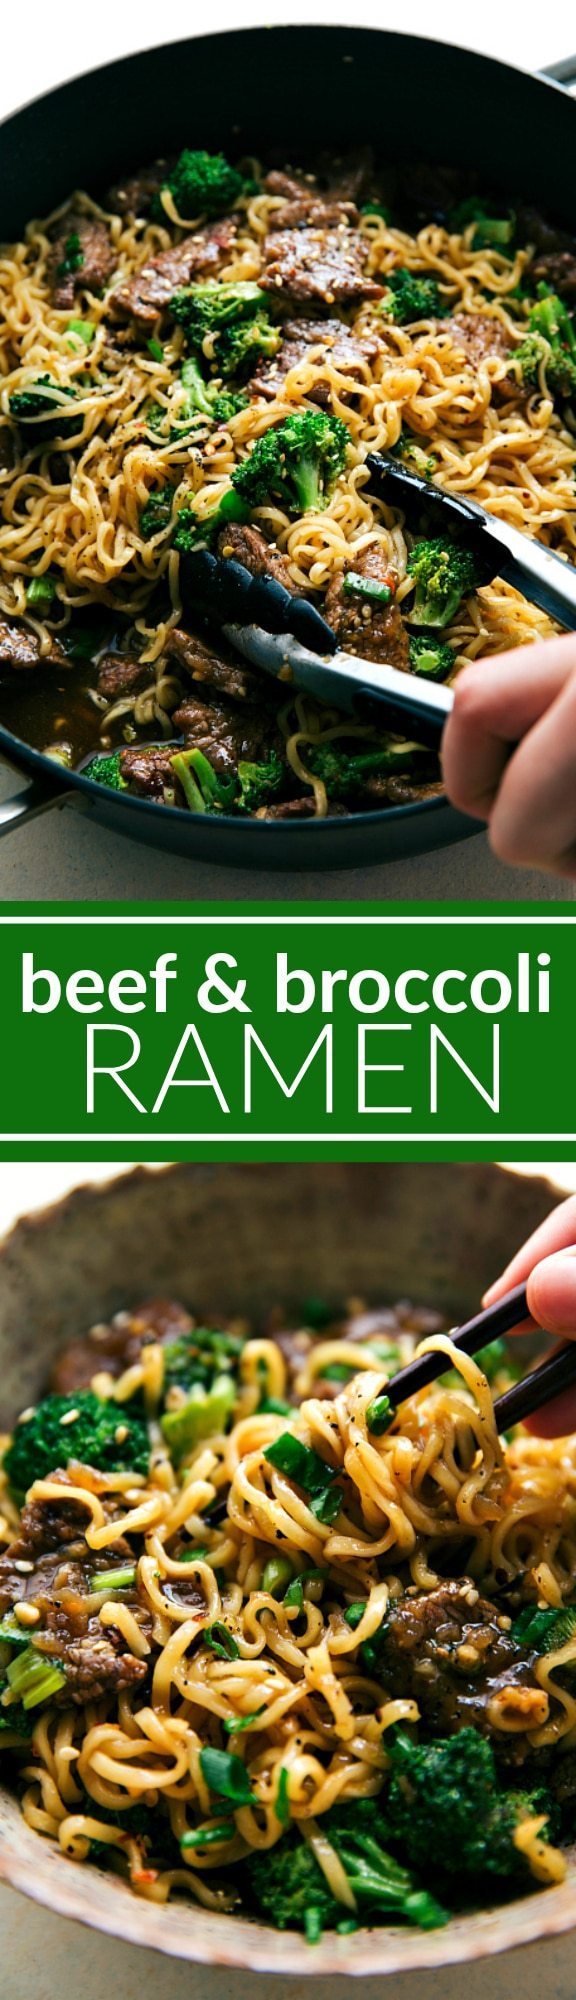 The BEST EVER beef and broccoli served over ramen! Recipe via chelseasmessyapron.com